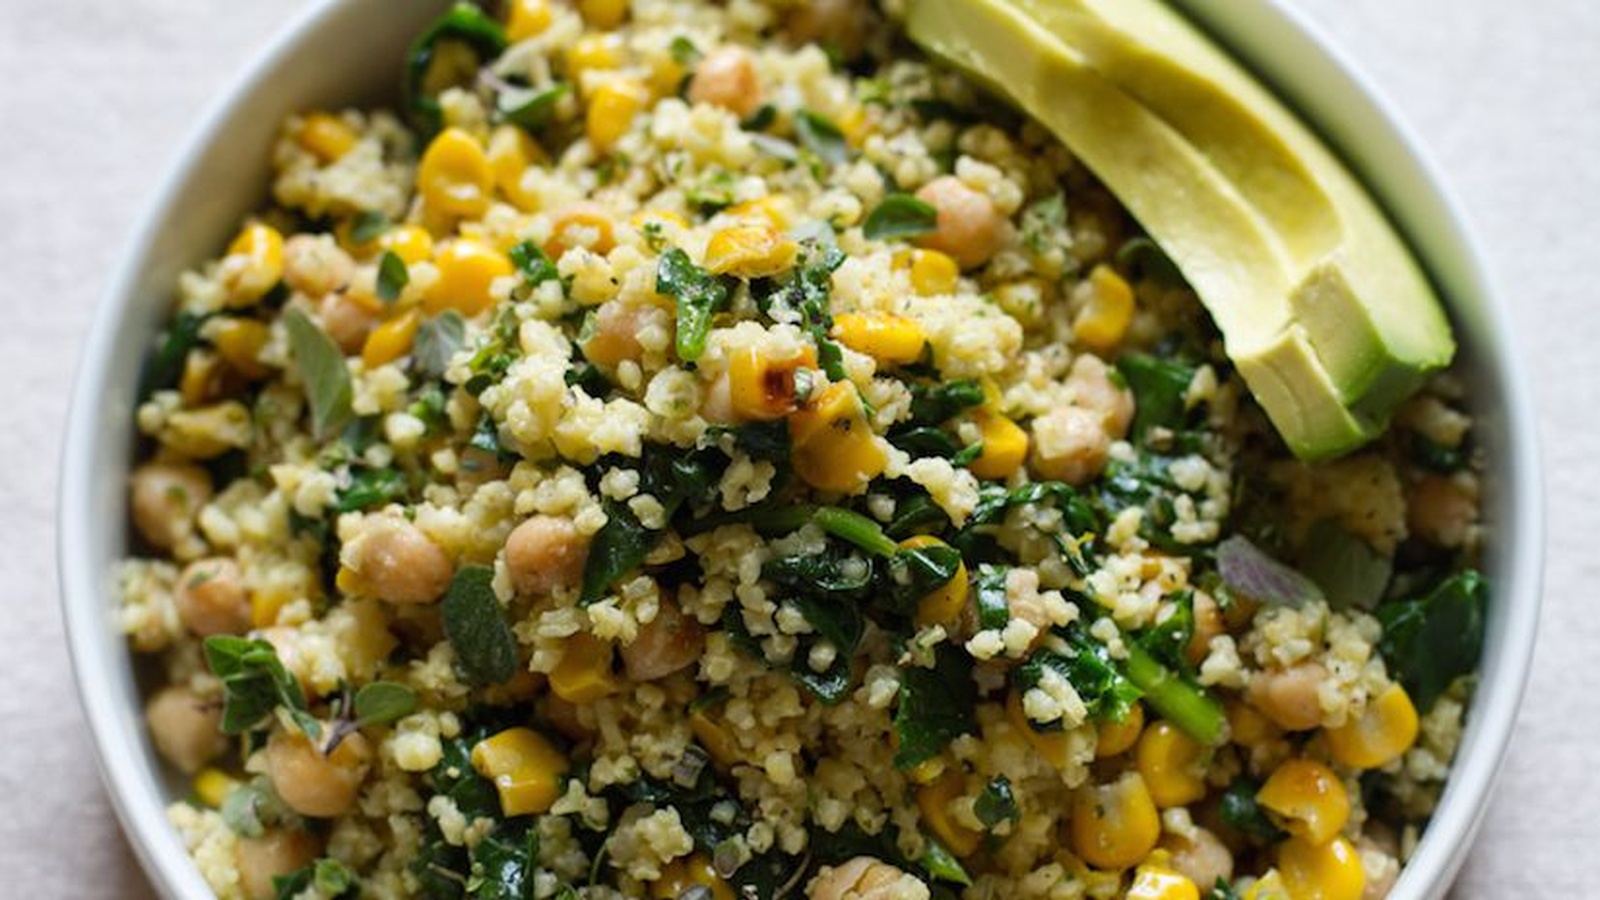 Lemony Millet Salad With Chickpeas, Corn & Spinach (Recipe)